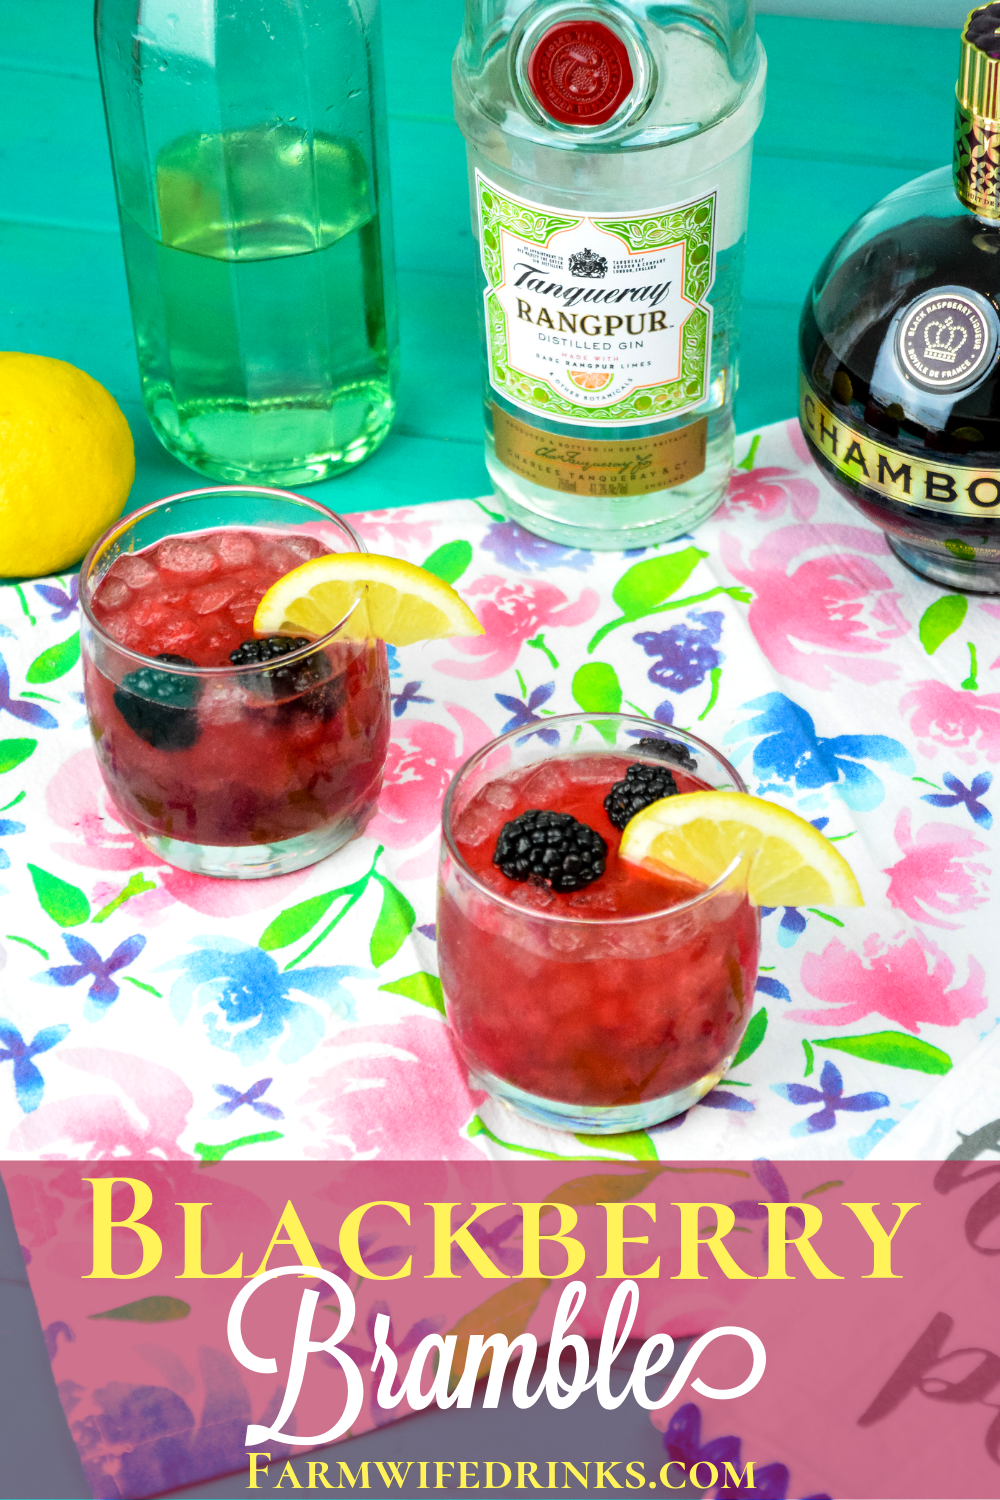 Blackberry Bramble Cocktail combines fresh lemon juice with muddled blackberries marries perfectly with gin and Chambord for a perfect summer cocktail.